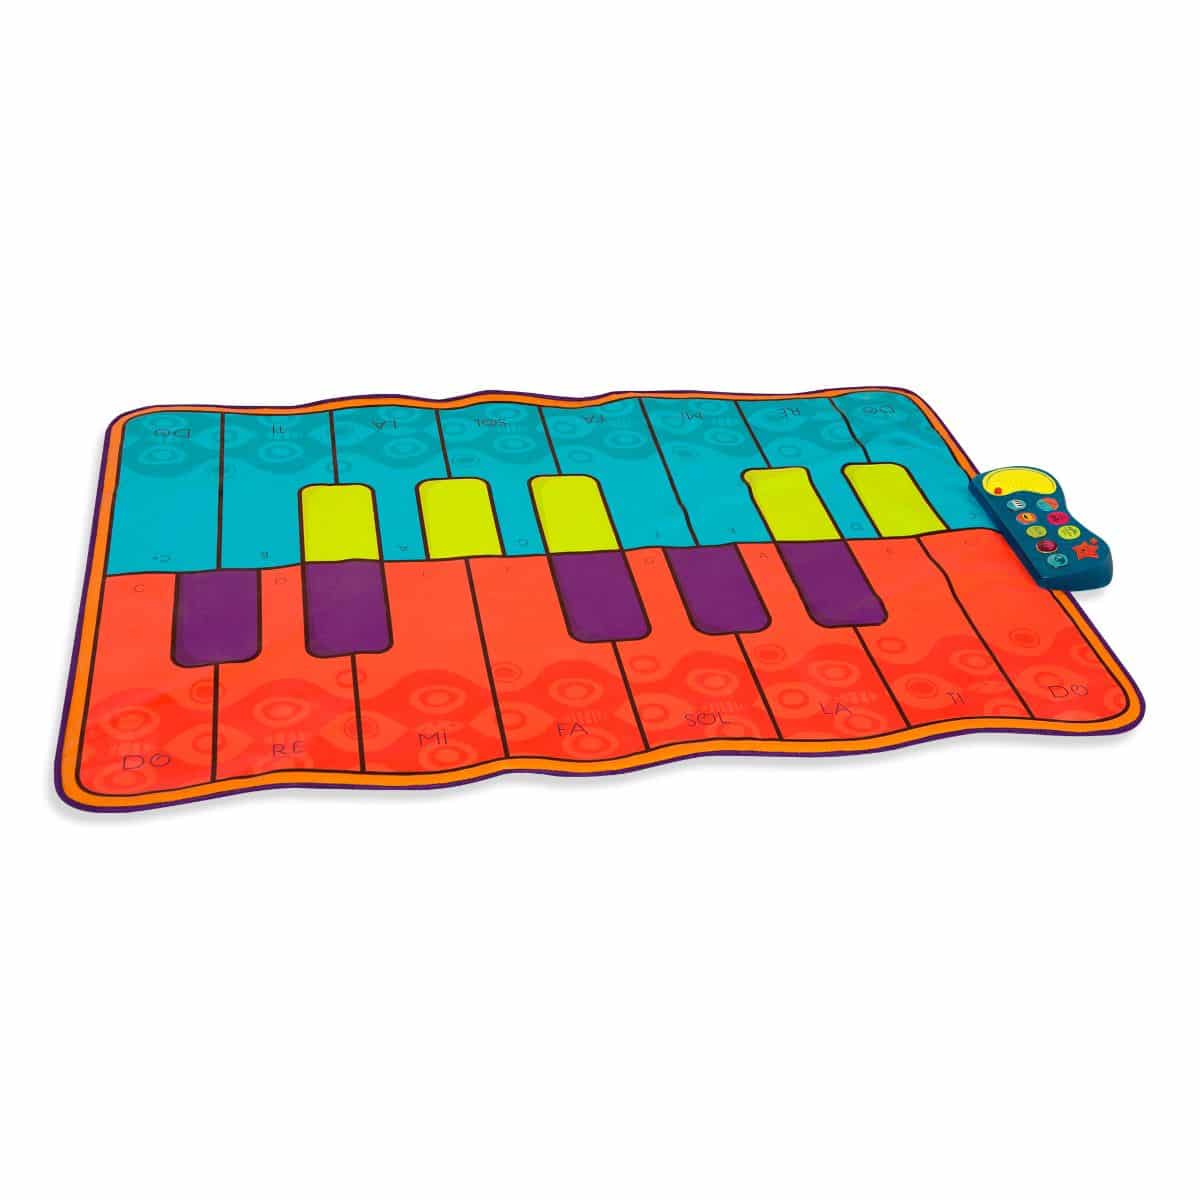 Musical Toys | Musical Instruments for Kids | B. toys